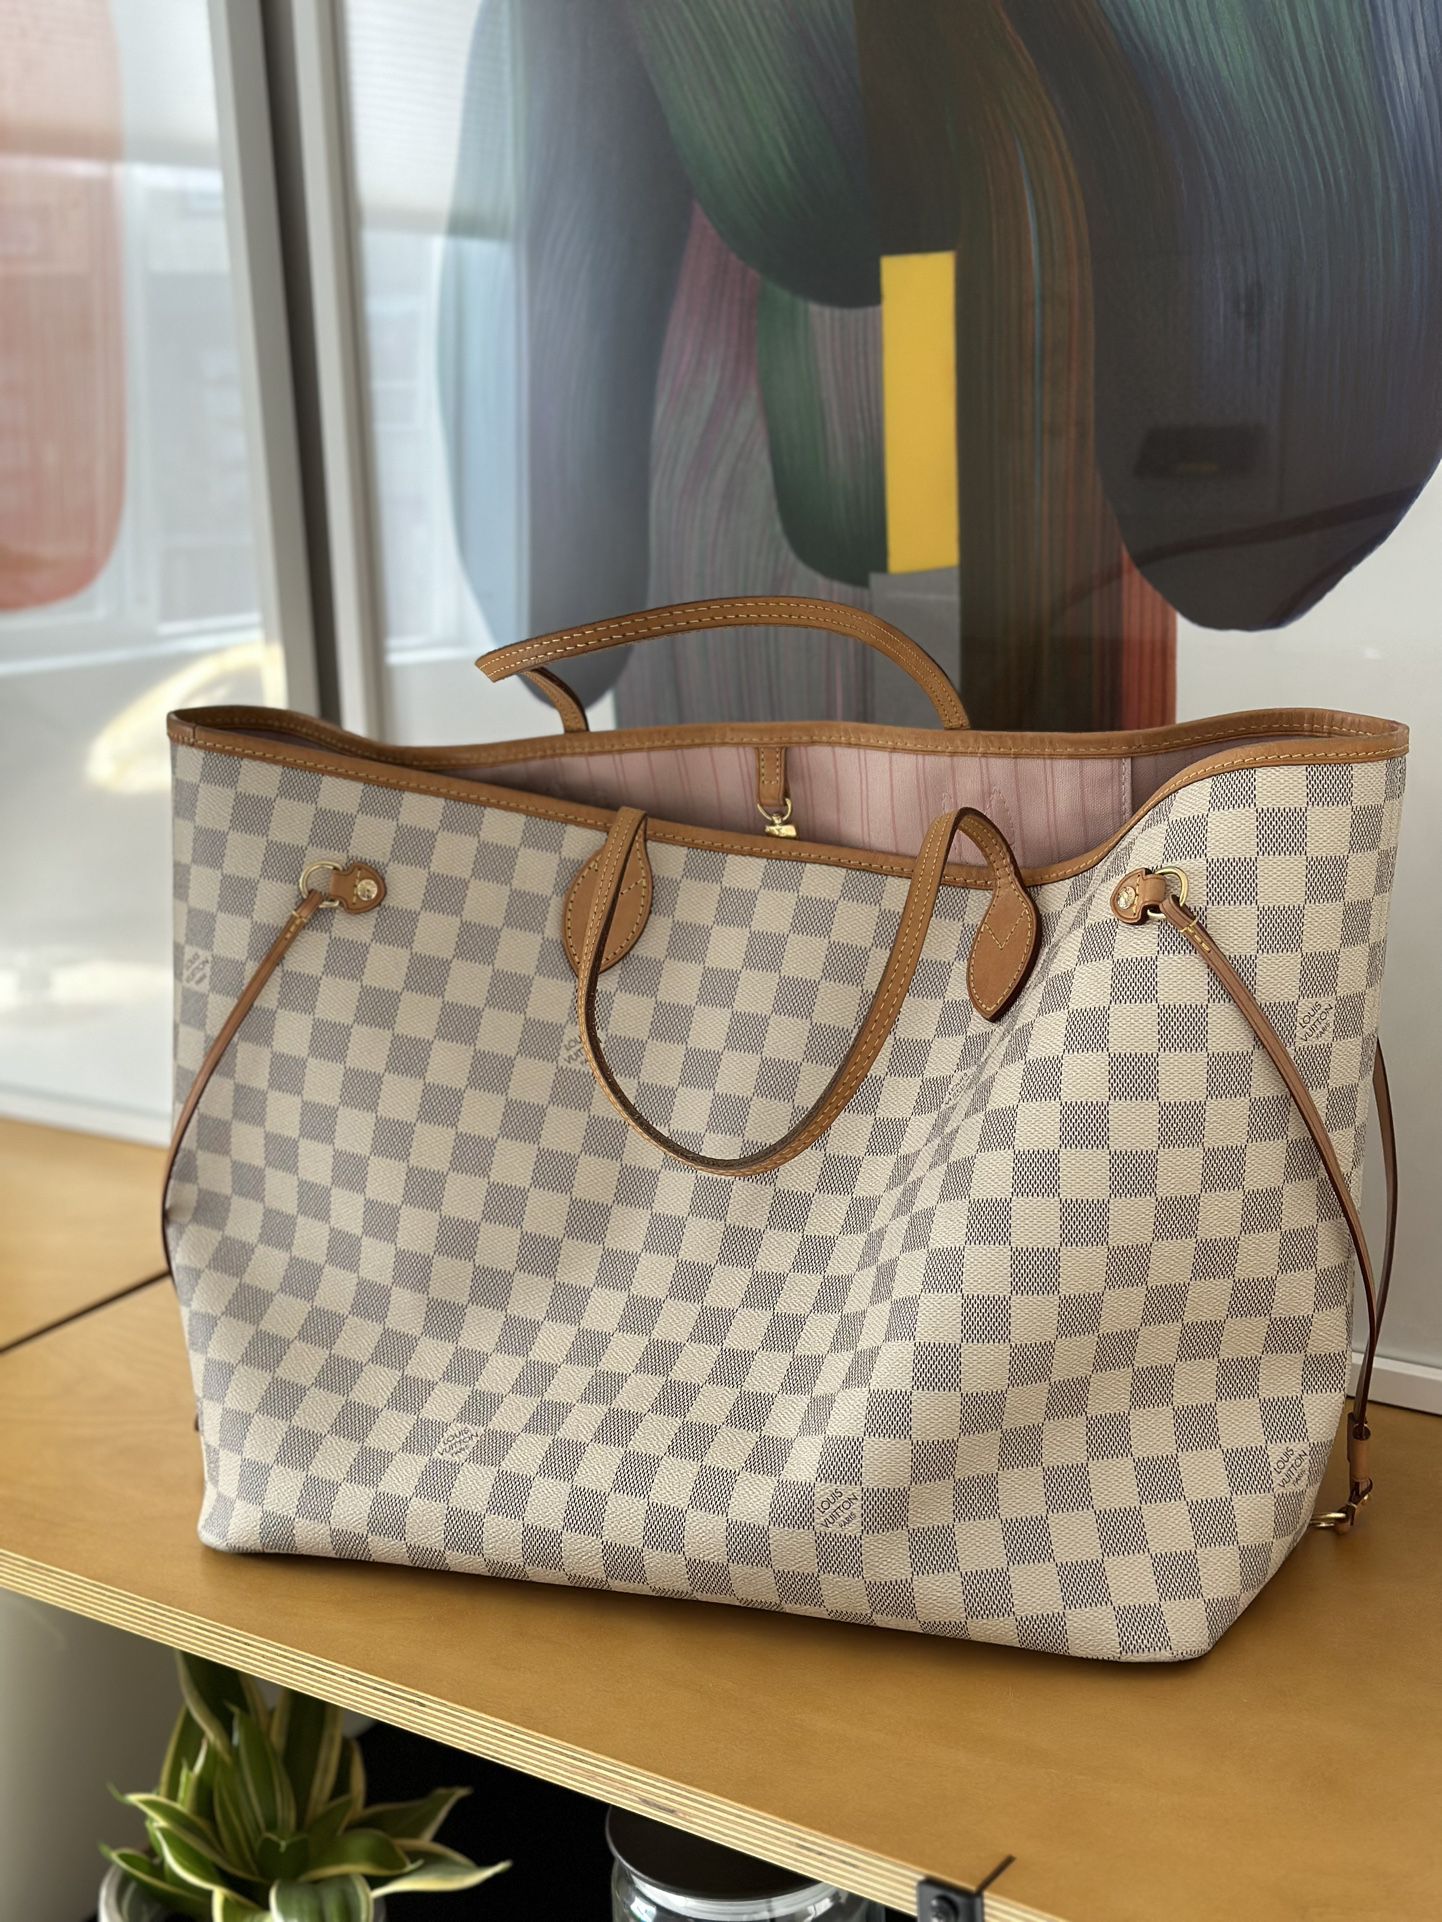 Louis Vuitton Neverfull MM Damier Azur for sale in Co. Galway for €1,300 on  DoneDeal